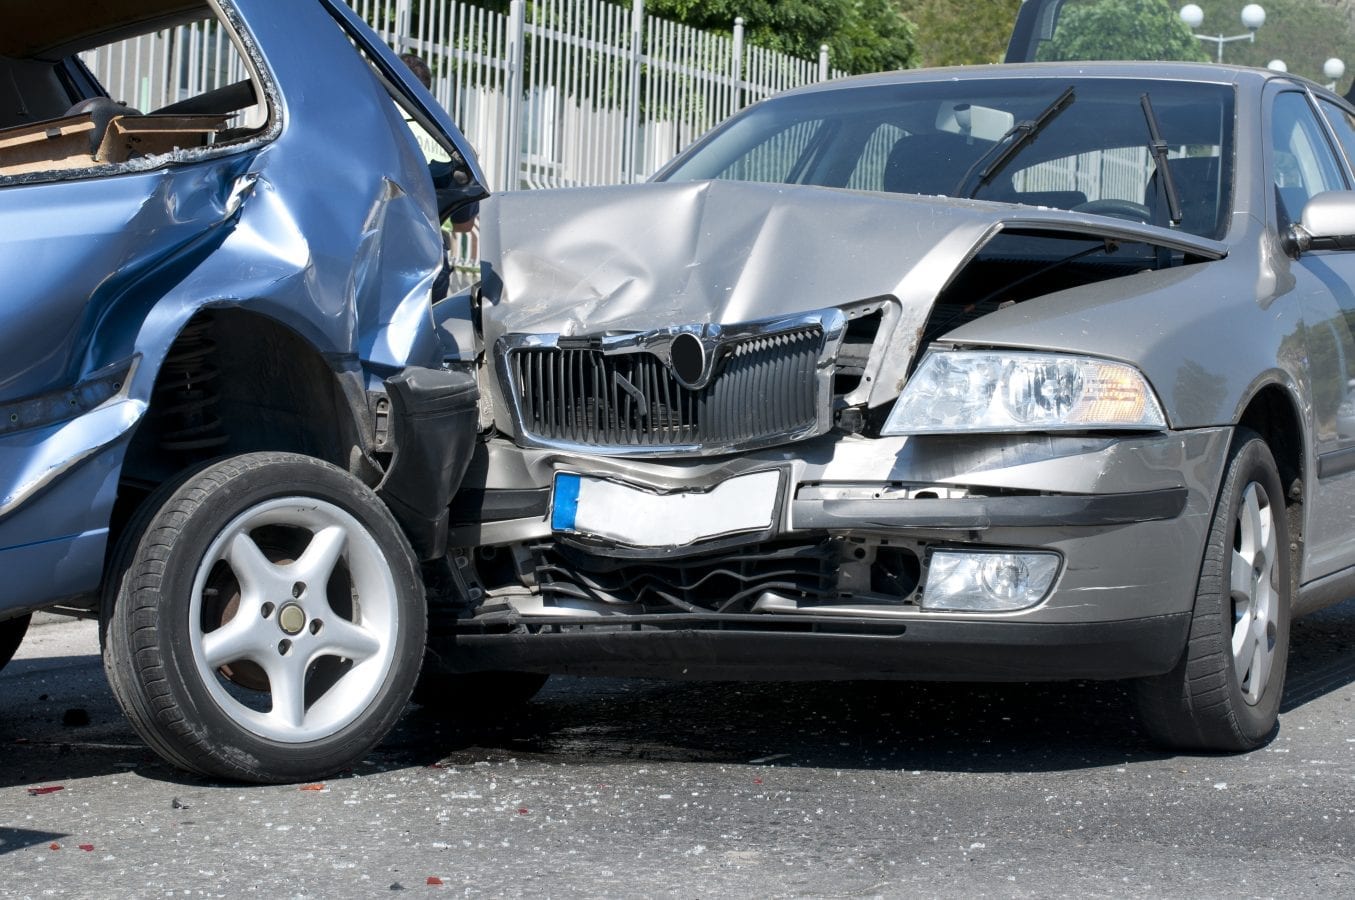 A situation that requires a car accident lawyer in Miami, FL